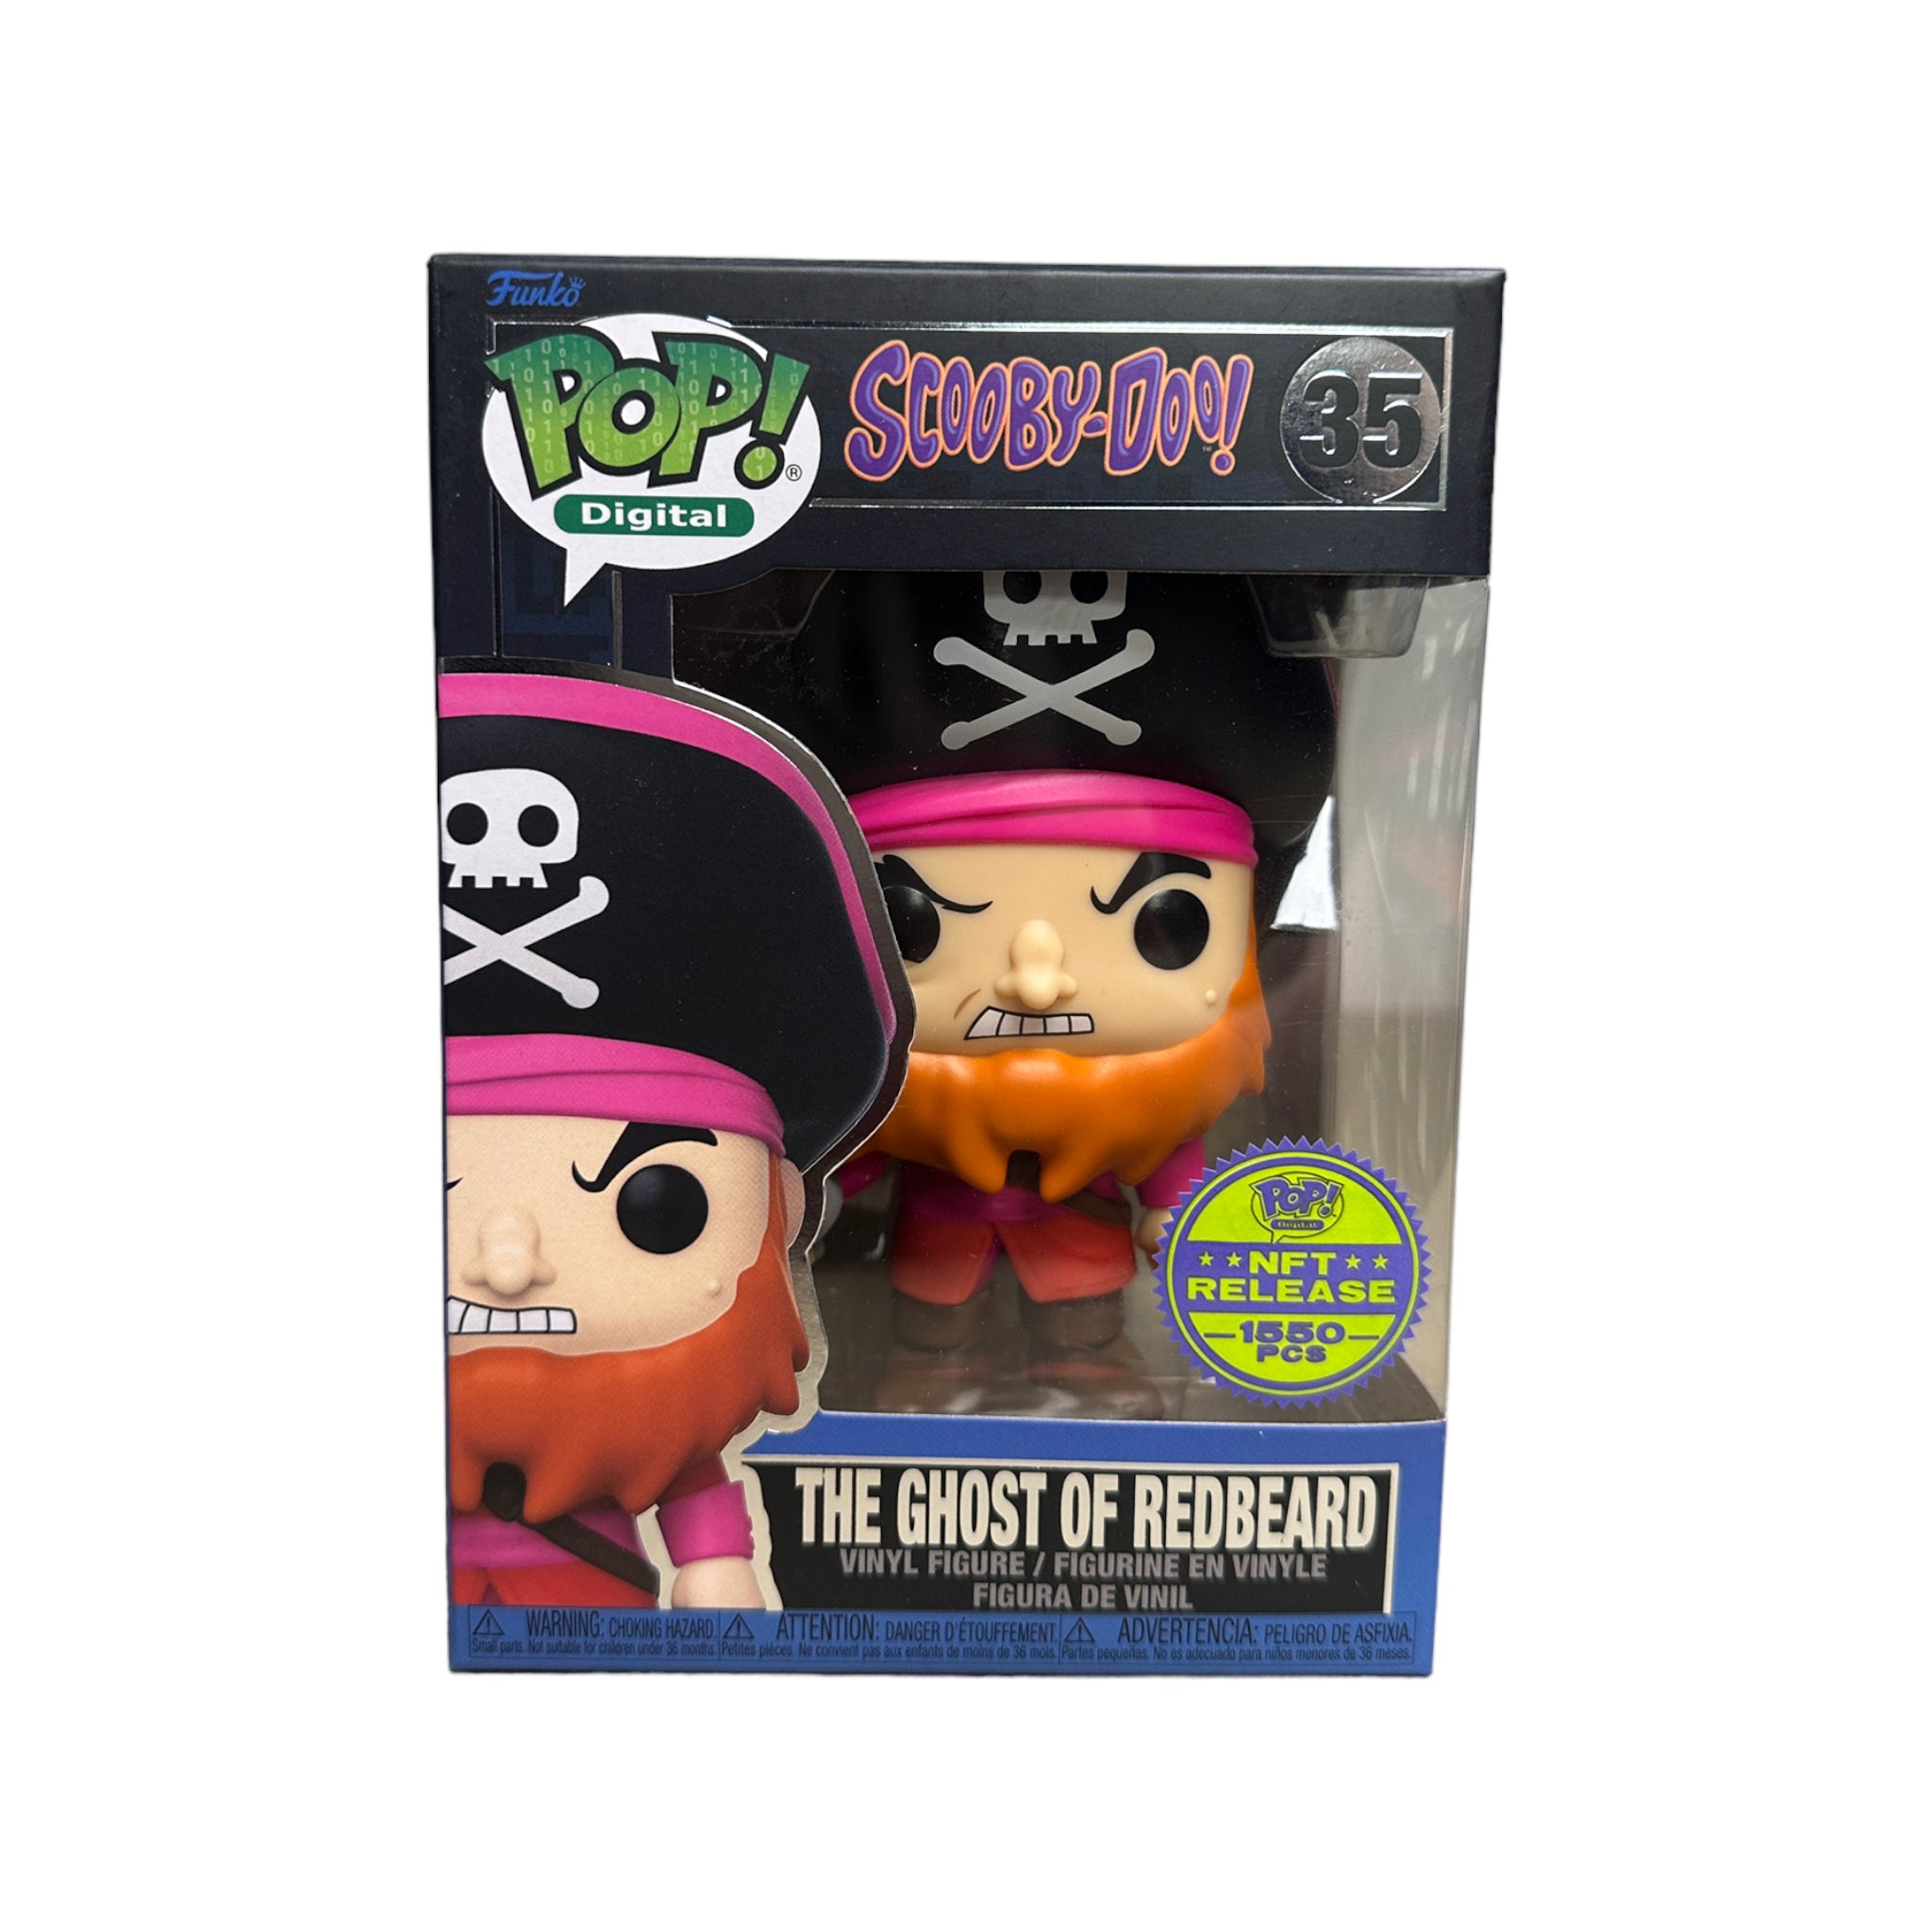 The Ghost of Redbeard #35 Funko Pop! - Scooby-Doo! - NFT Release Exclusive LE1550 Pcs - Condition 8.75/10